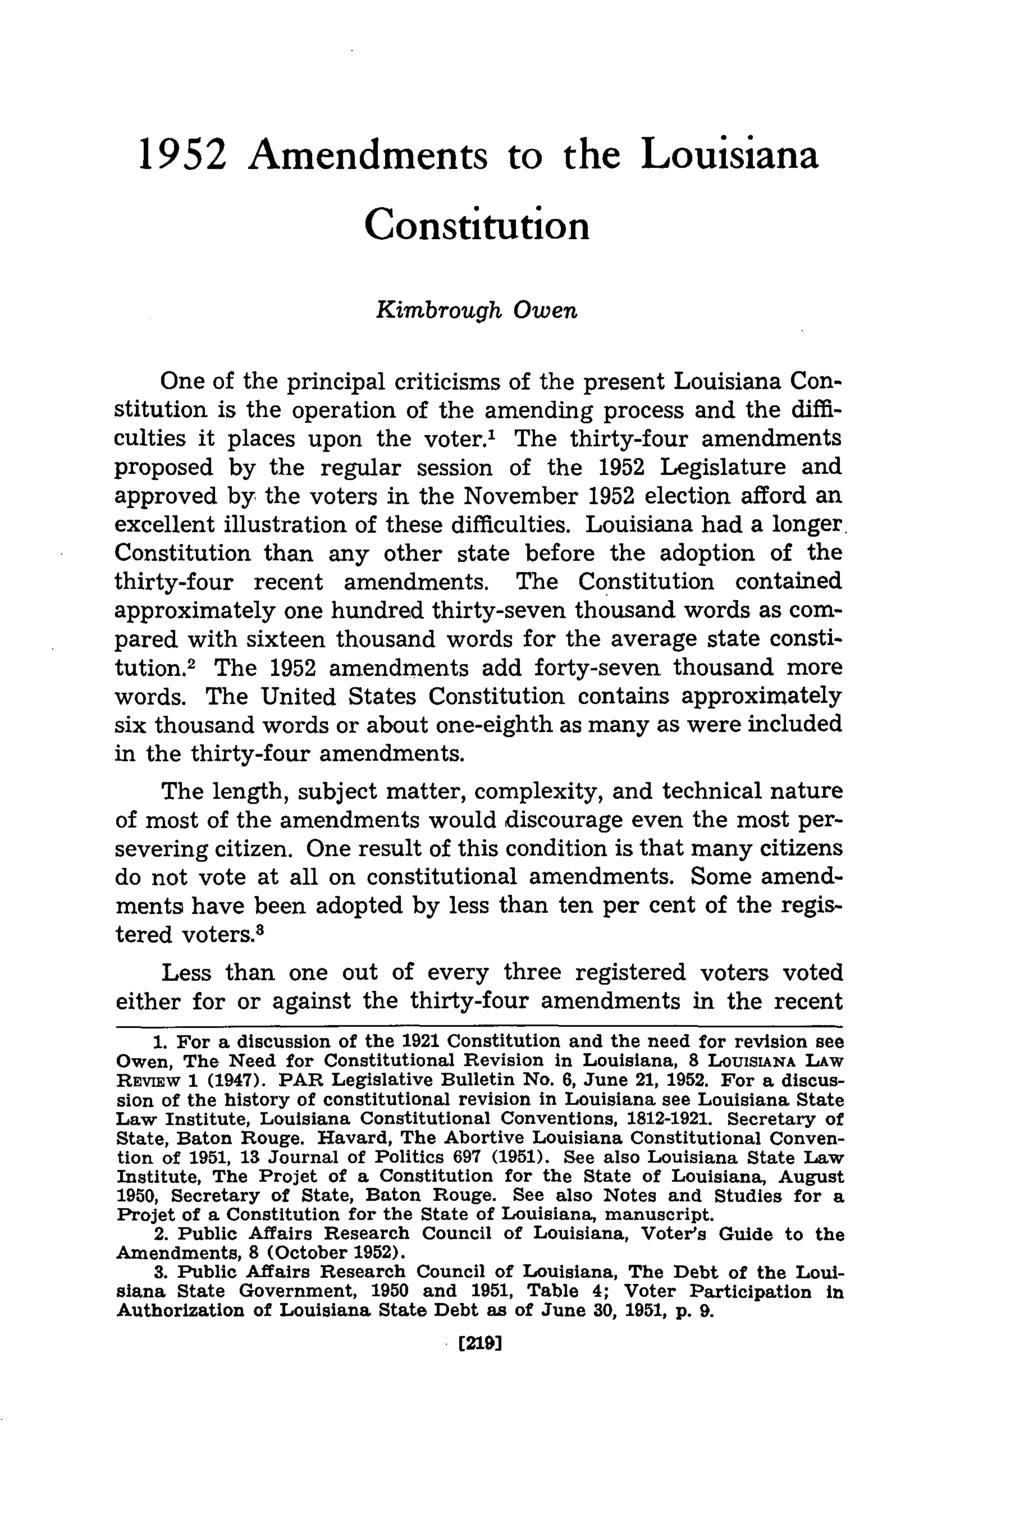 1952 Amendments to the Louisiana Constitution Kimbrough Owen One of the principal criticisms of the present Louisiana Constitution is the operation of the amending process and the difficulties it